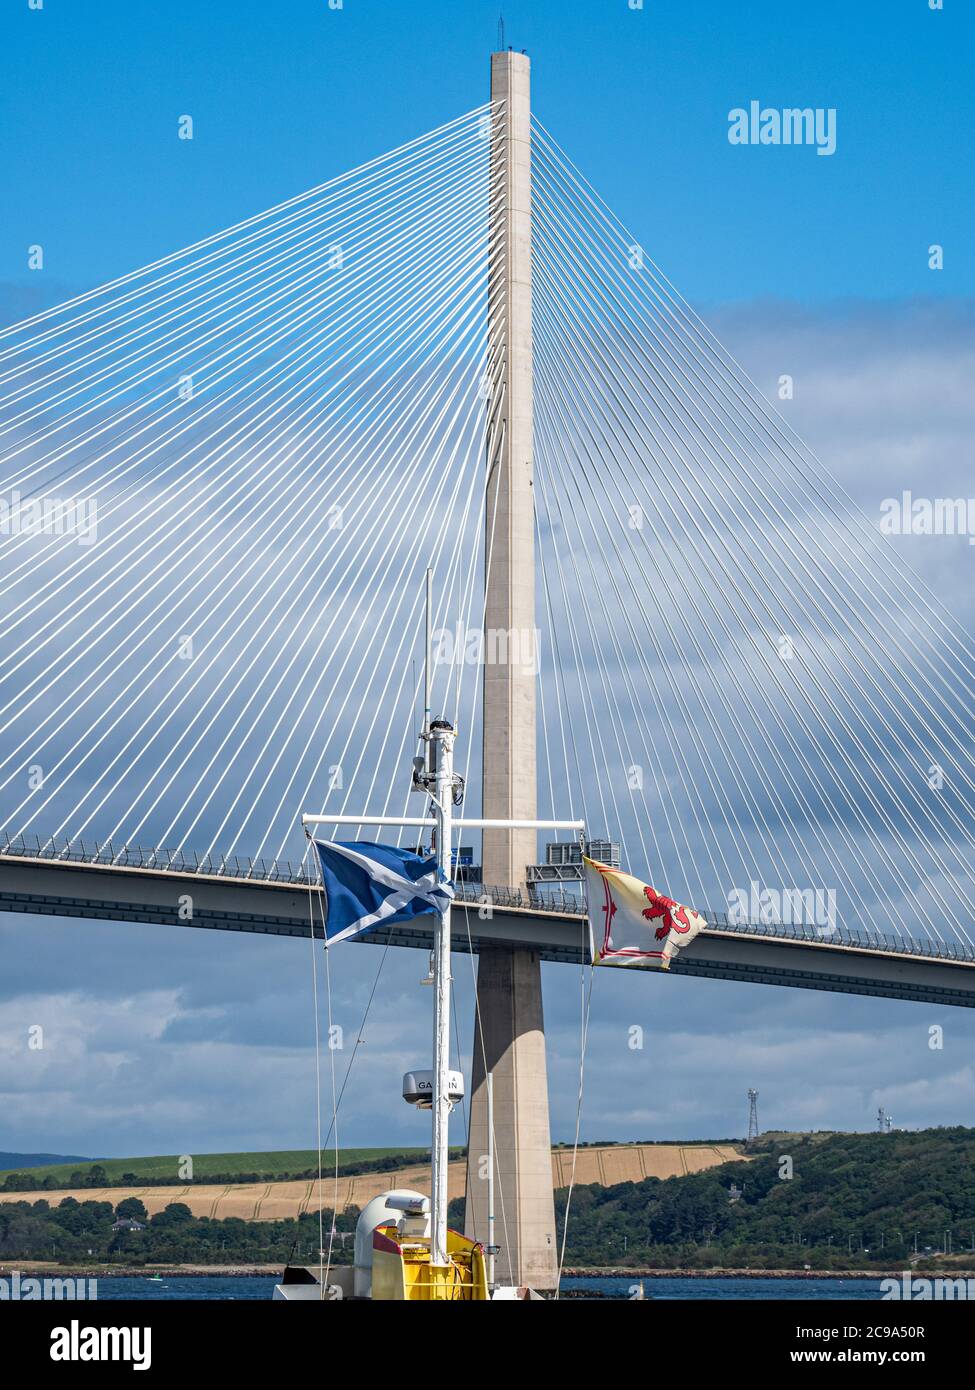 The new Forth Bridge is an impressive sight as they across the Firth of Forth, as well as providing road and rail transport links between Edinburgh an Stock Photo